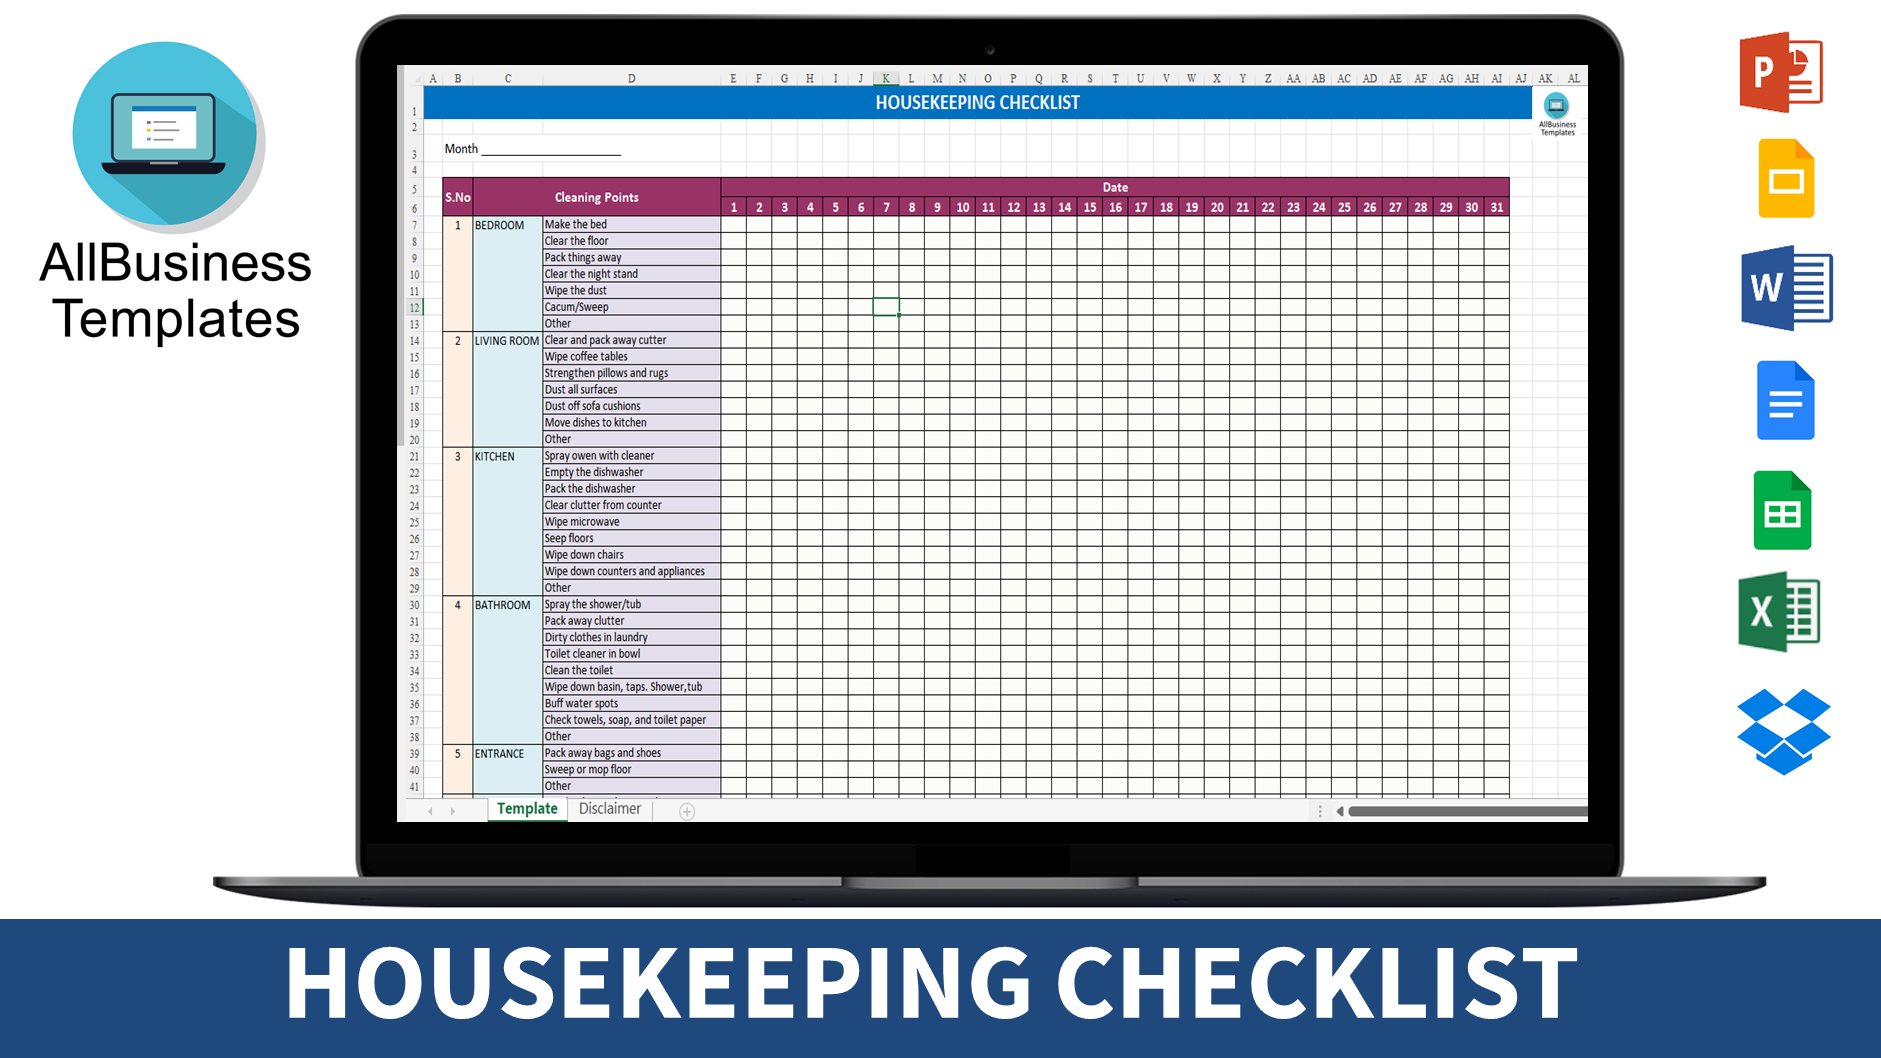 Housekeeping Checklist Excel Templates At Allbusinesstemplates